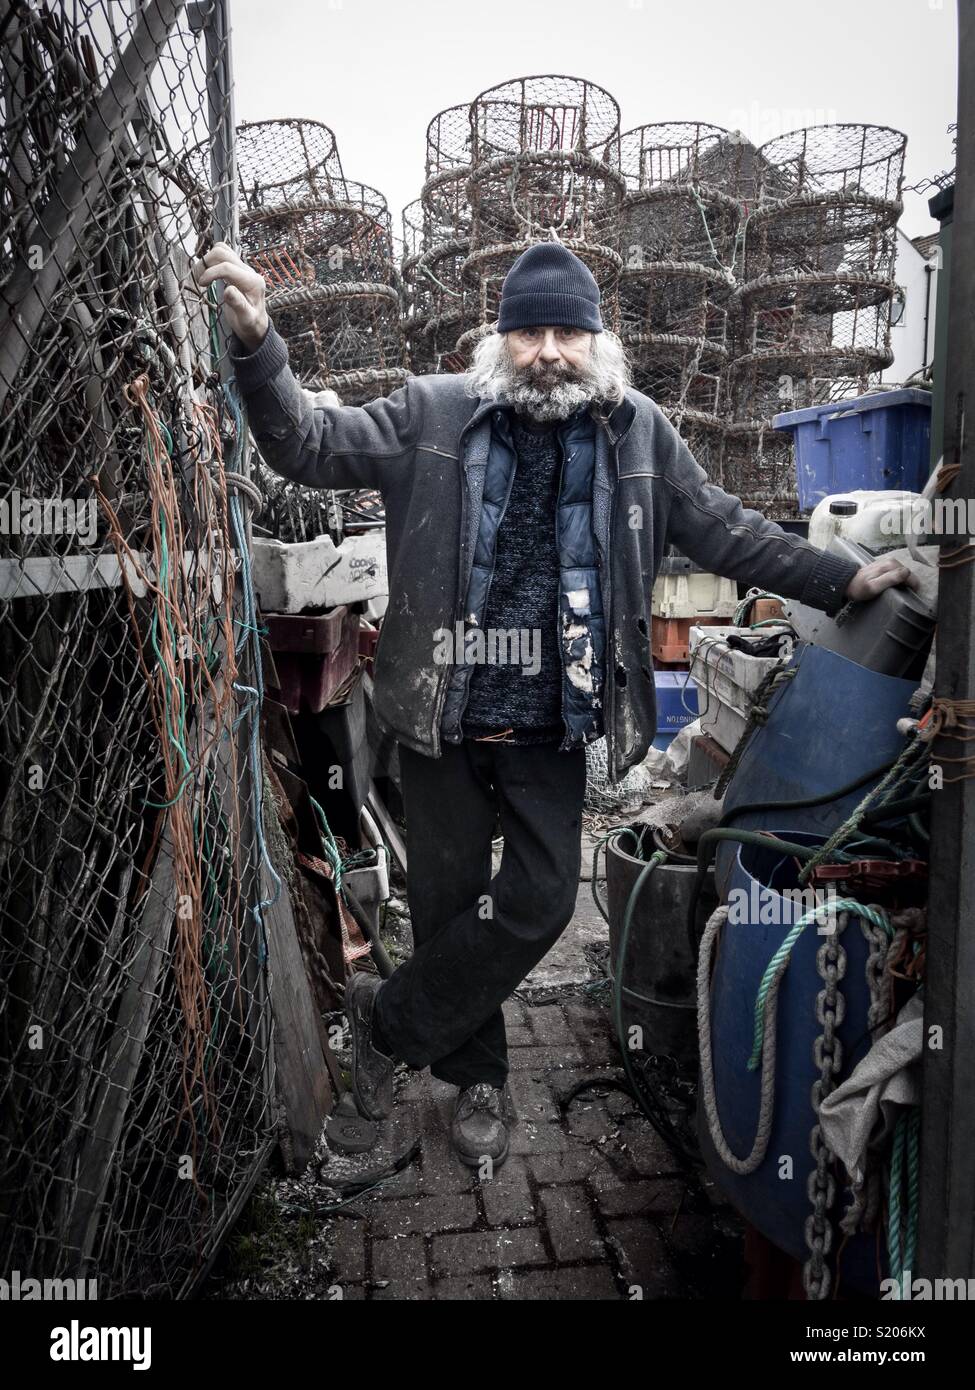 A trawlerman seen with his fish traps at the Camber Docks in Old Portsmouth, Hampshire Stock Photo